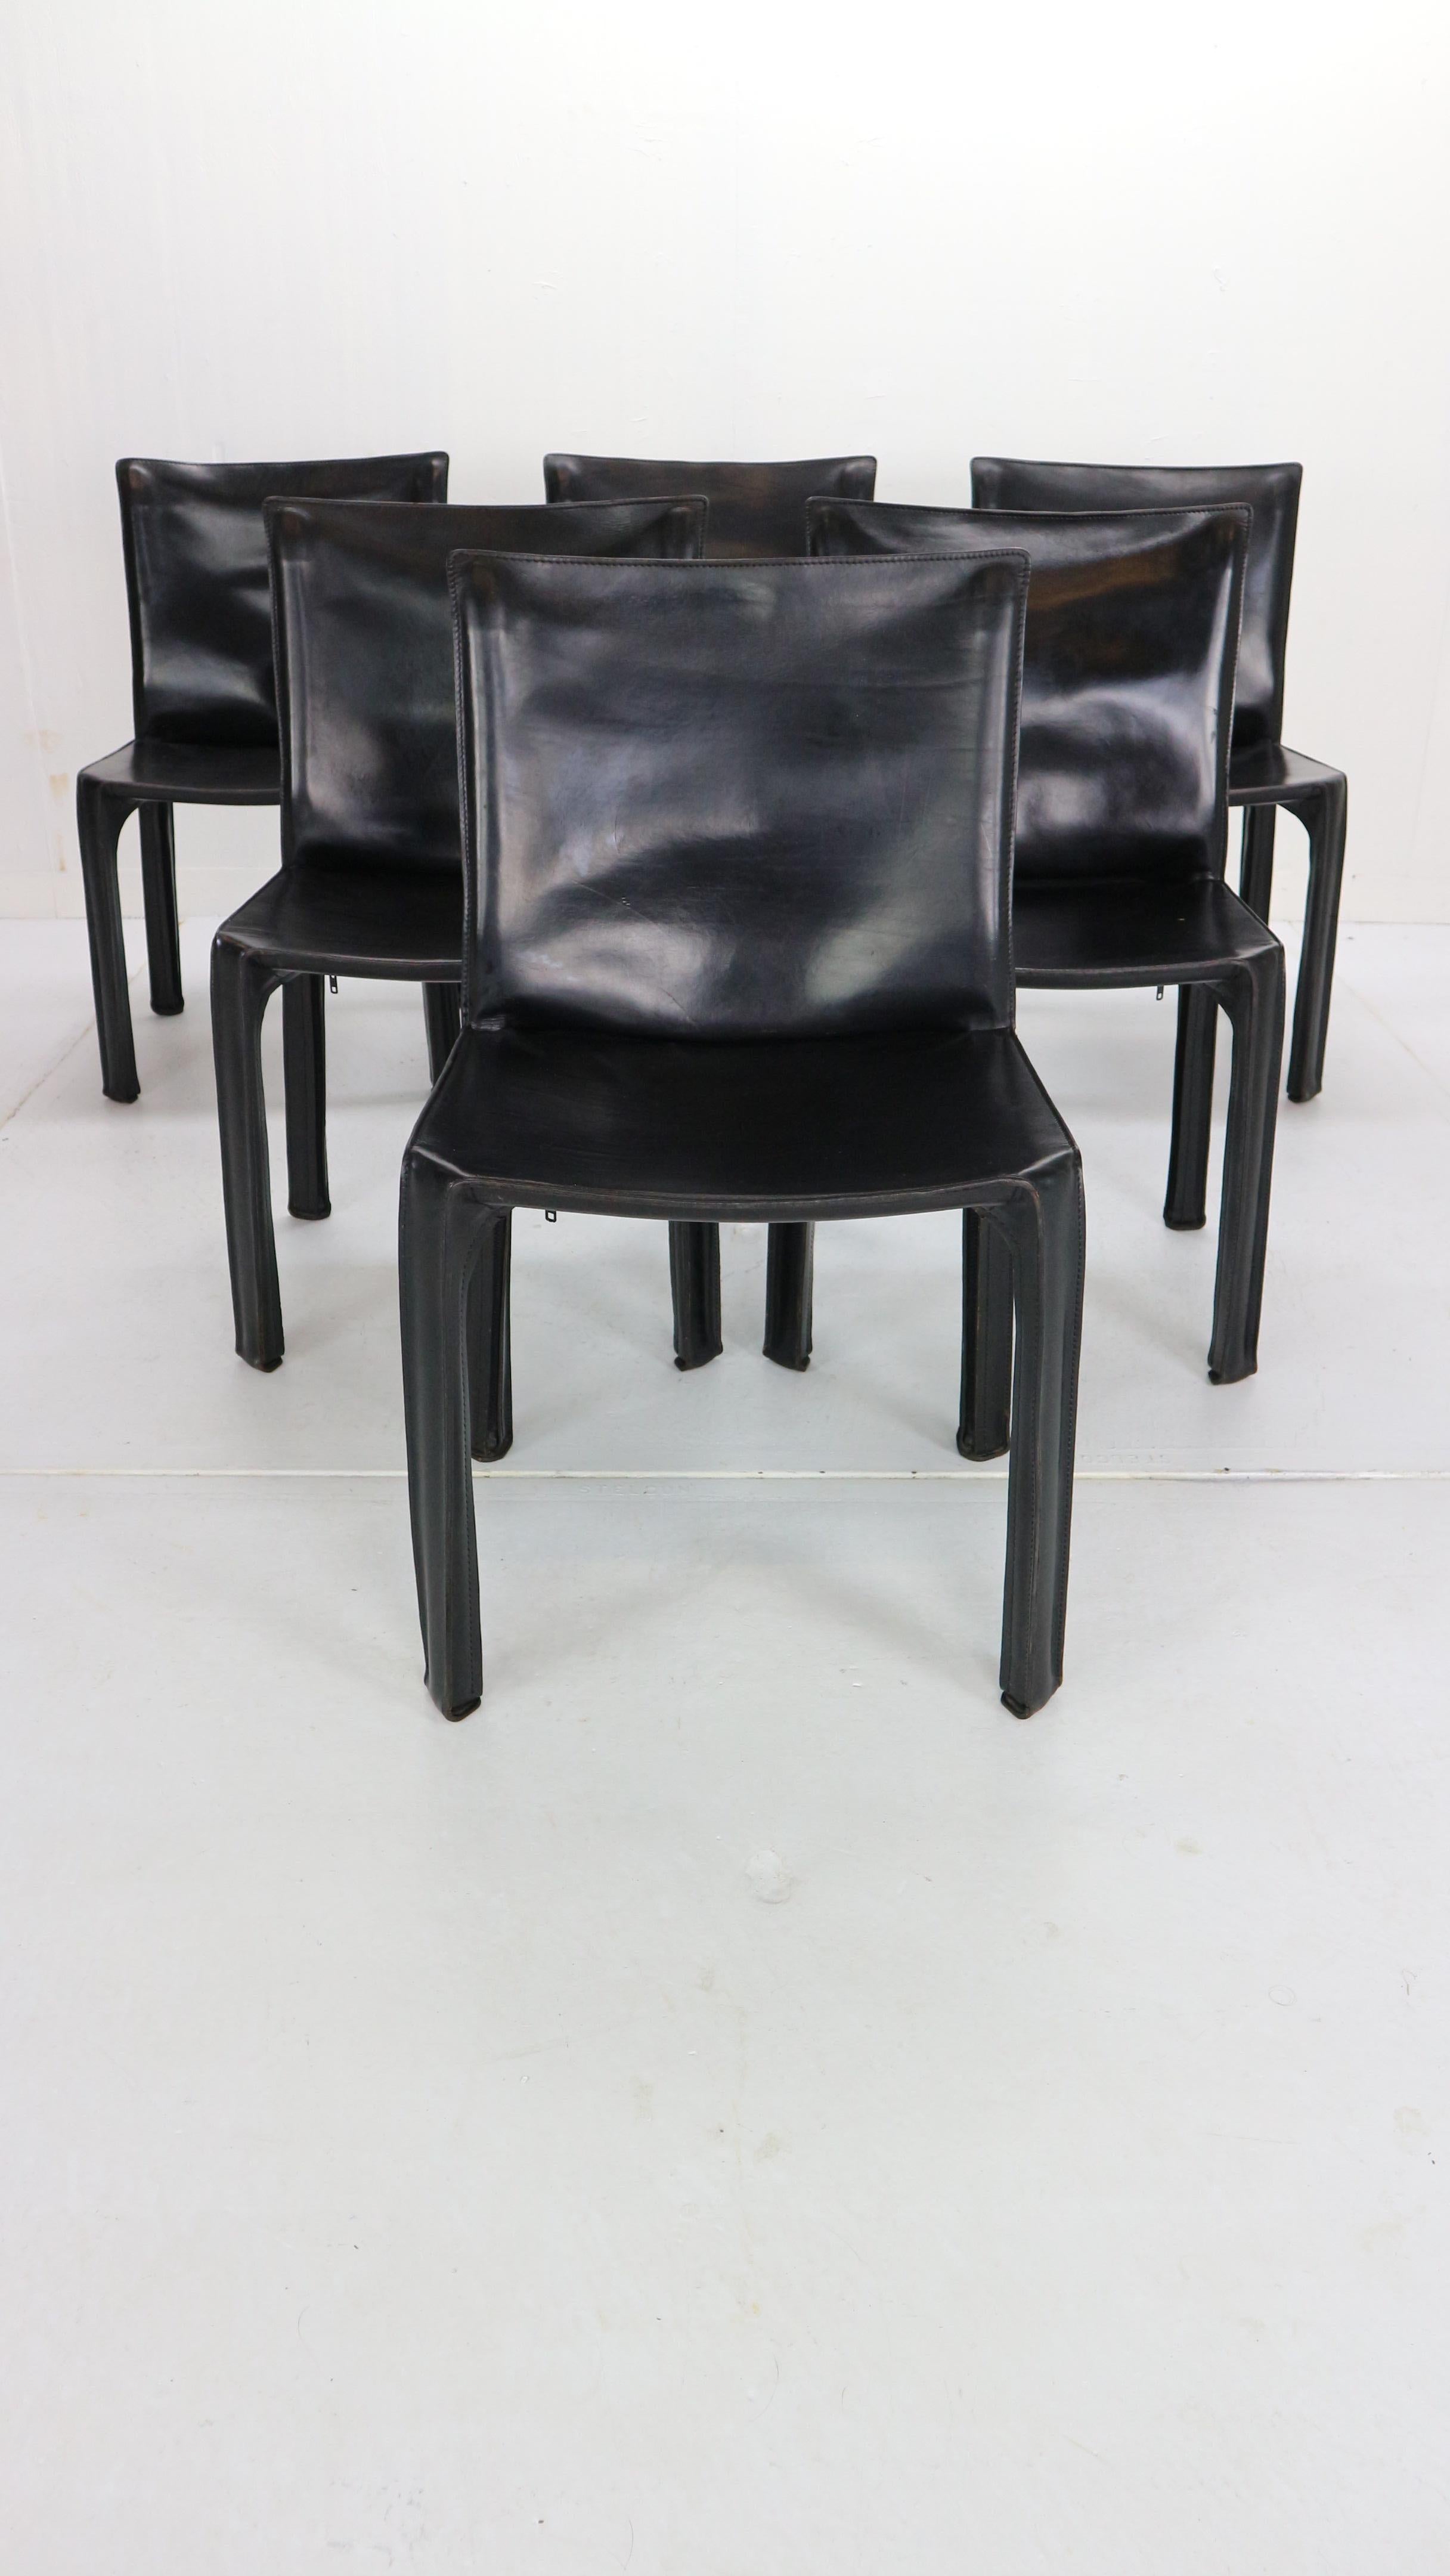 Set of 6 dining room chairs designed by Mario Bellini and manufactured by high quality design furniture fabric- Cassina in 1970s period, Italy.
This chairs are the early edition of the manufacture.
Model- Cab 412. All chairs are marked and in a